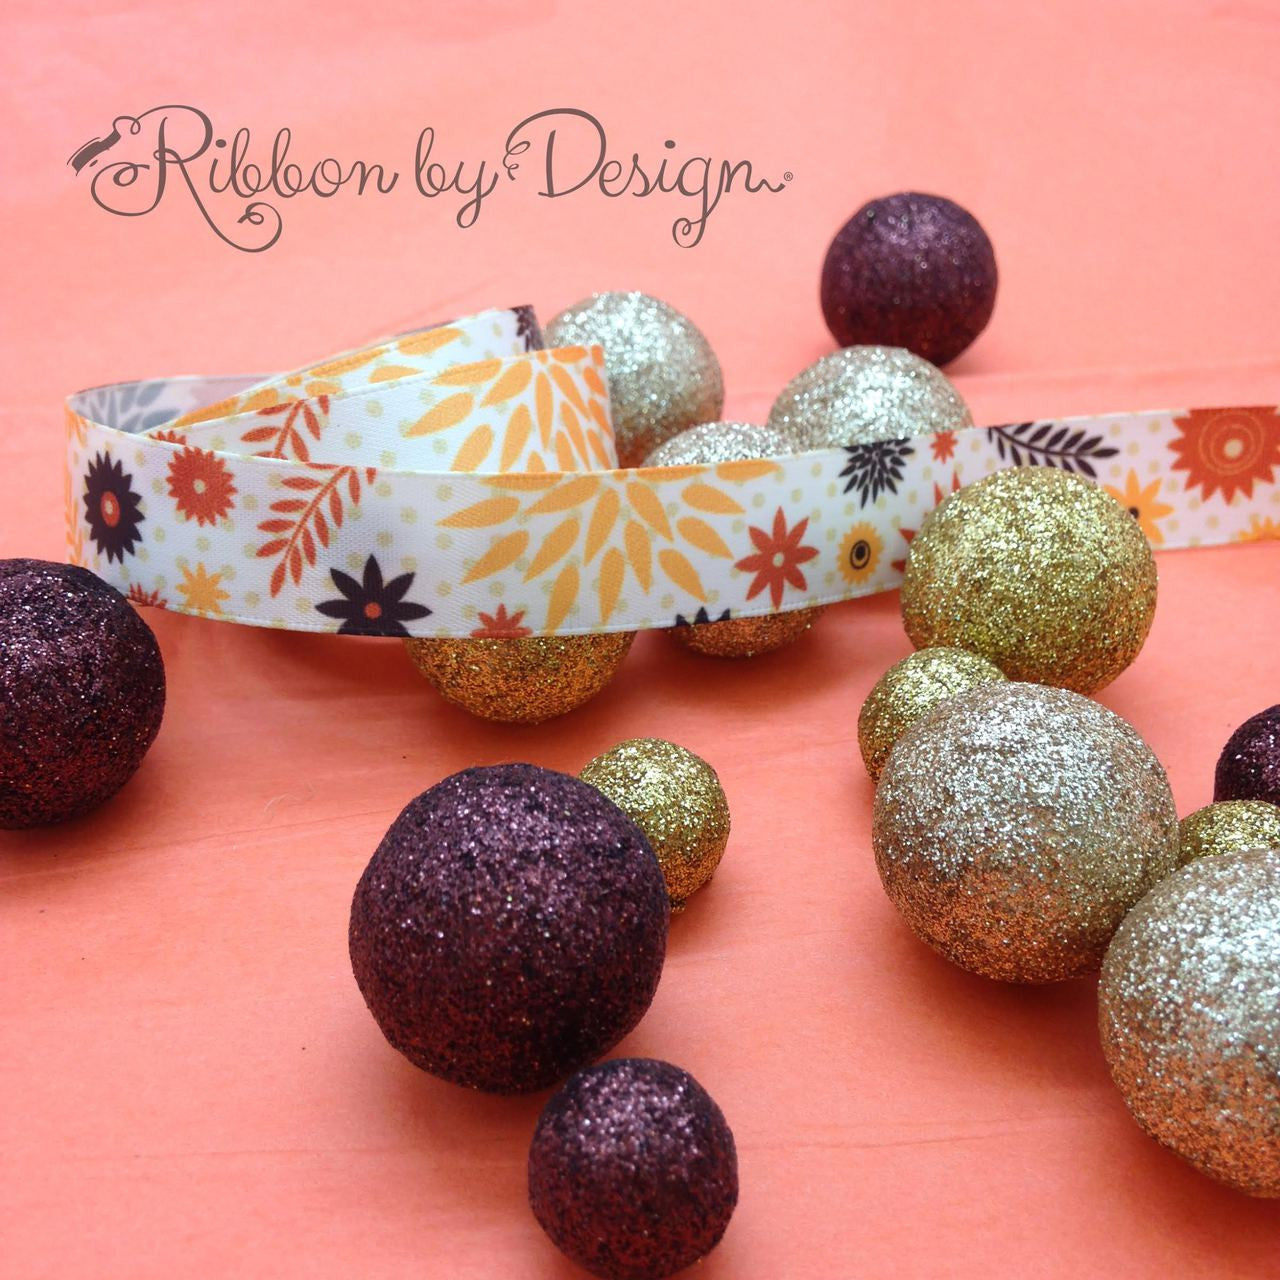 Our retro Fall design makes a fun statement with gold, silver and brown too!